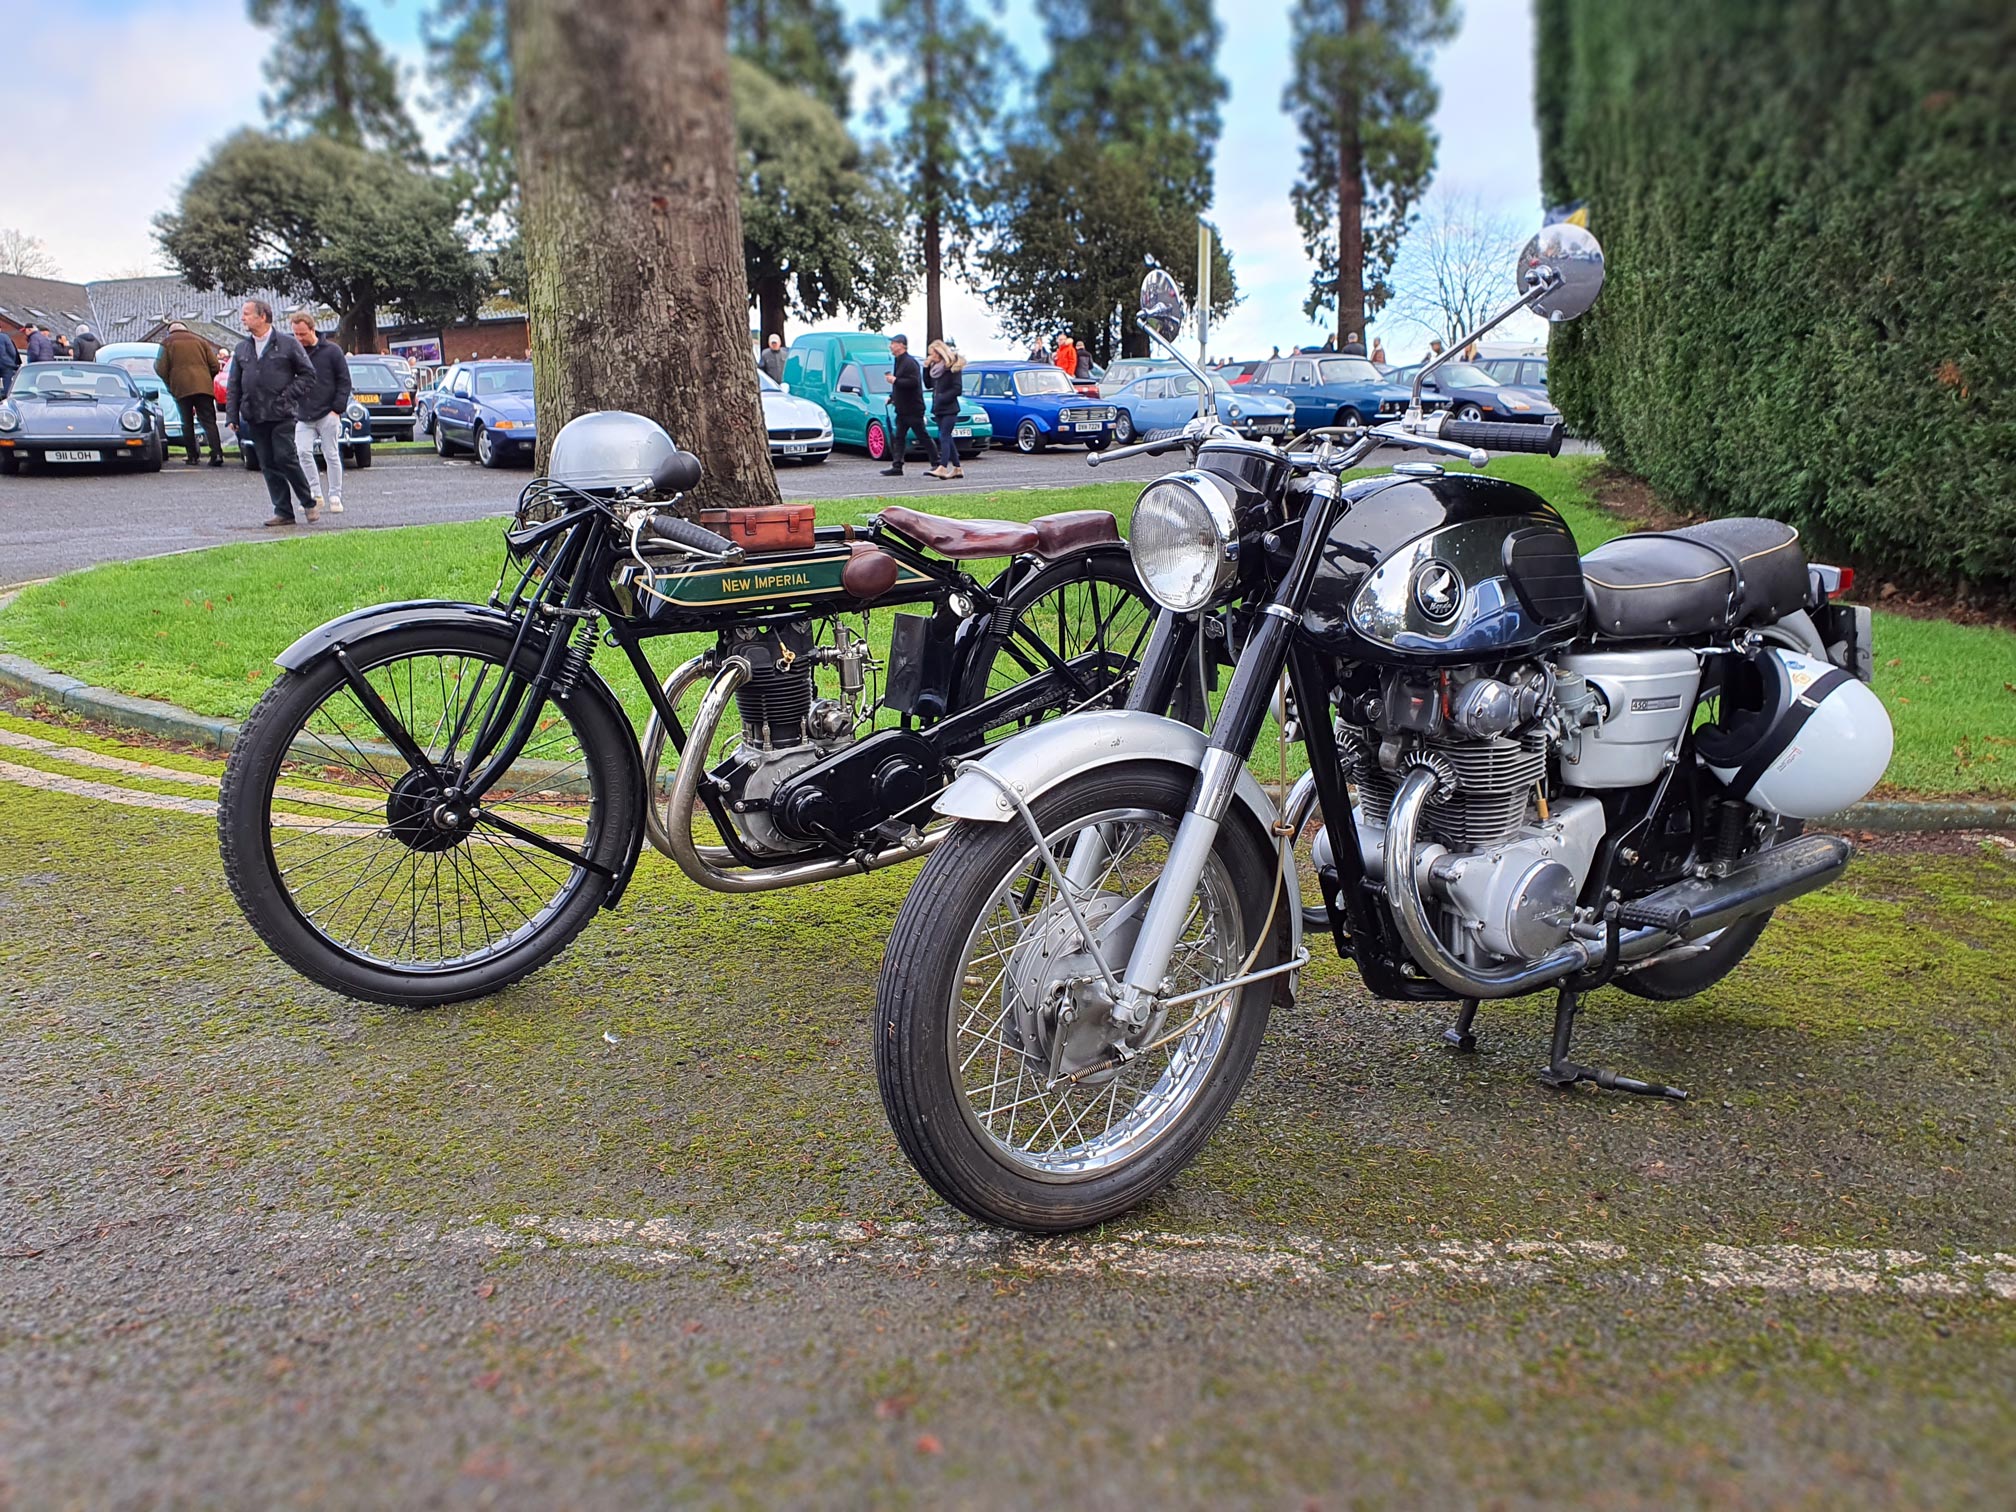 Classic motorcycles parked together